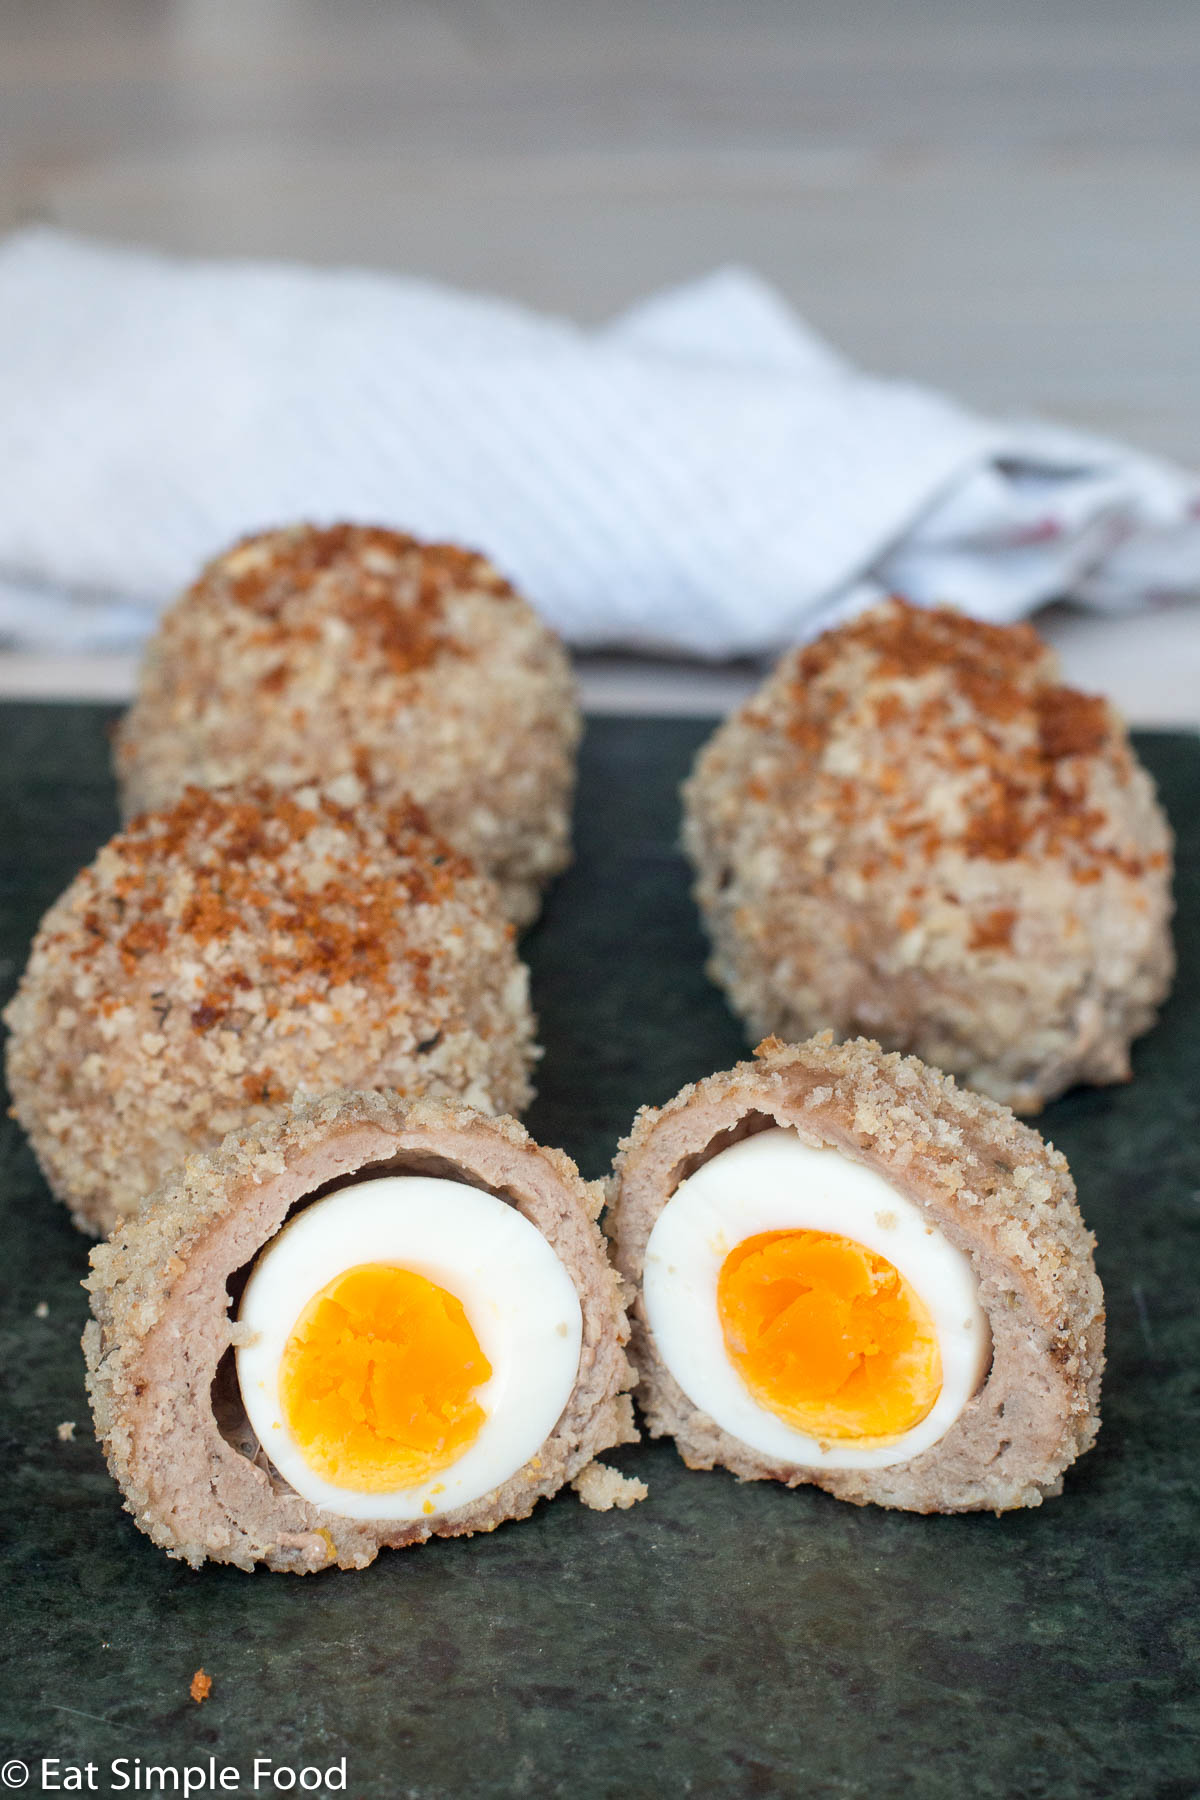 Side view of a cut open turkey scotch egg revealing a the egg and the egg yolk wrapped in cooked turkey and breadcrumbs.